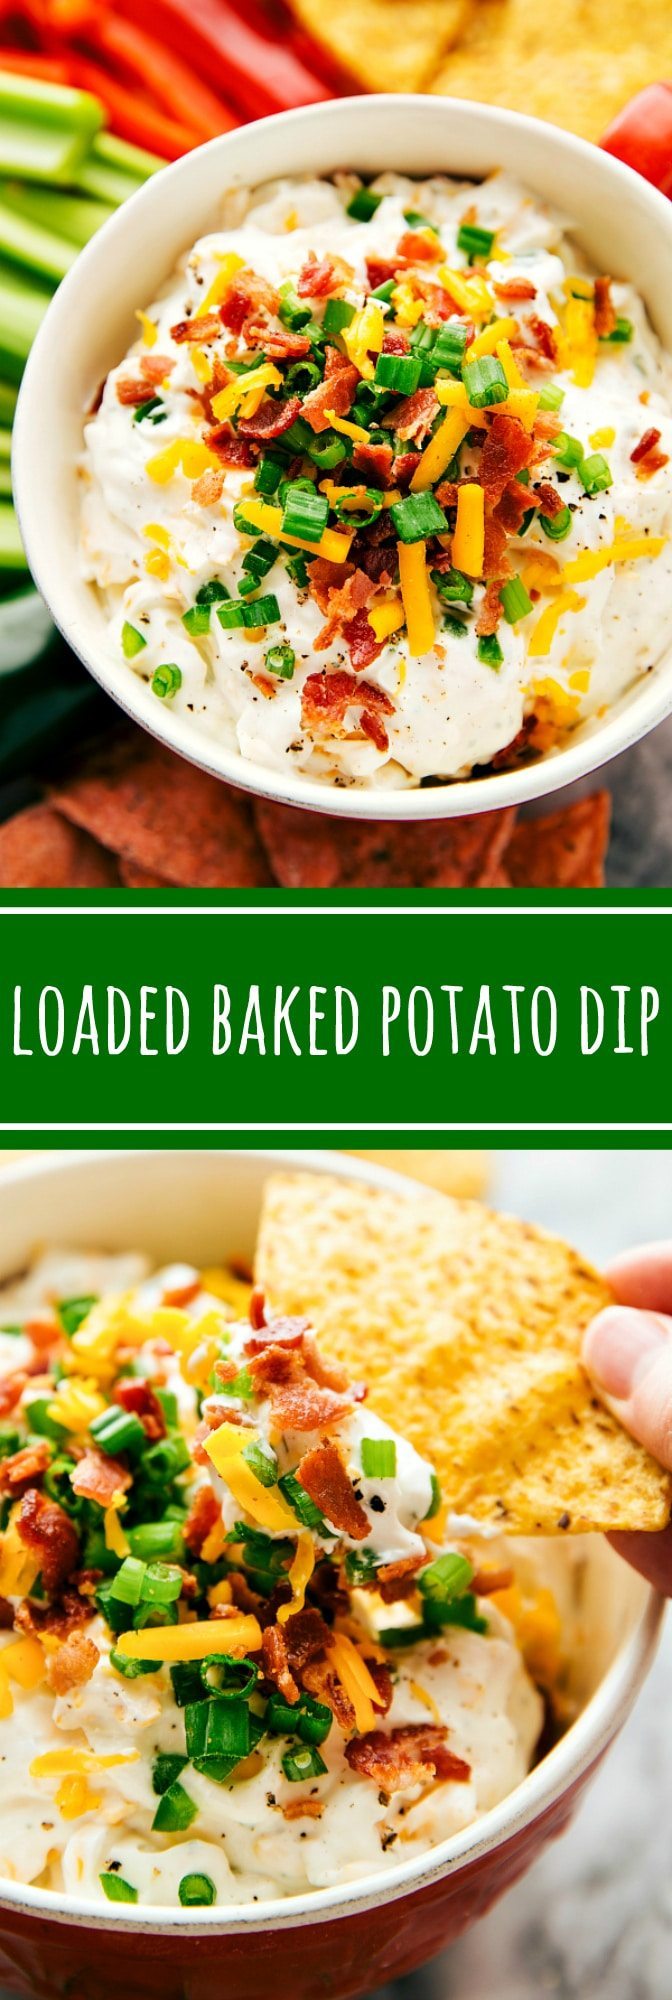 Delicious and simple appetizer -- a loaded baked potato dip. All of your favorite baked potato toppings in appetizer form